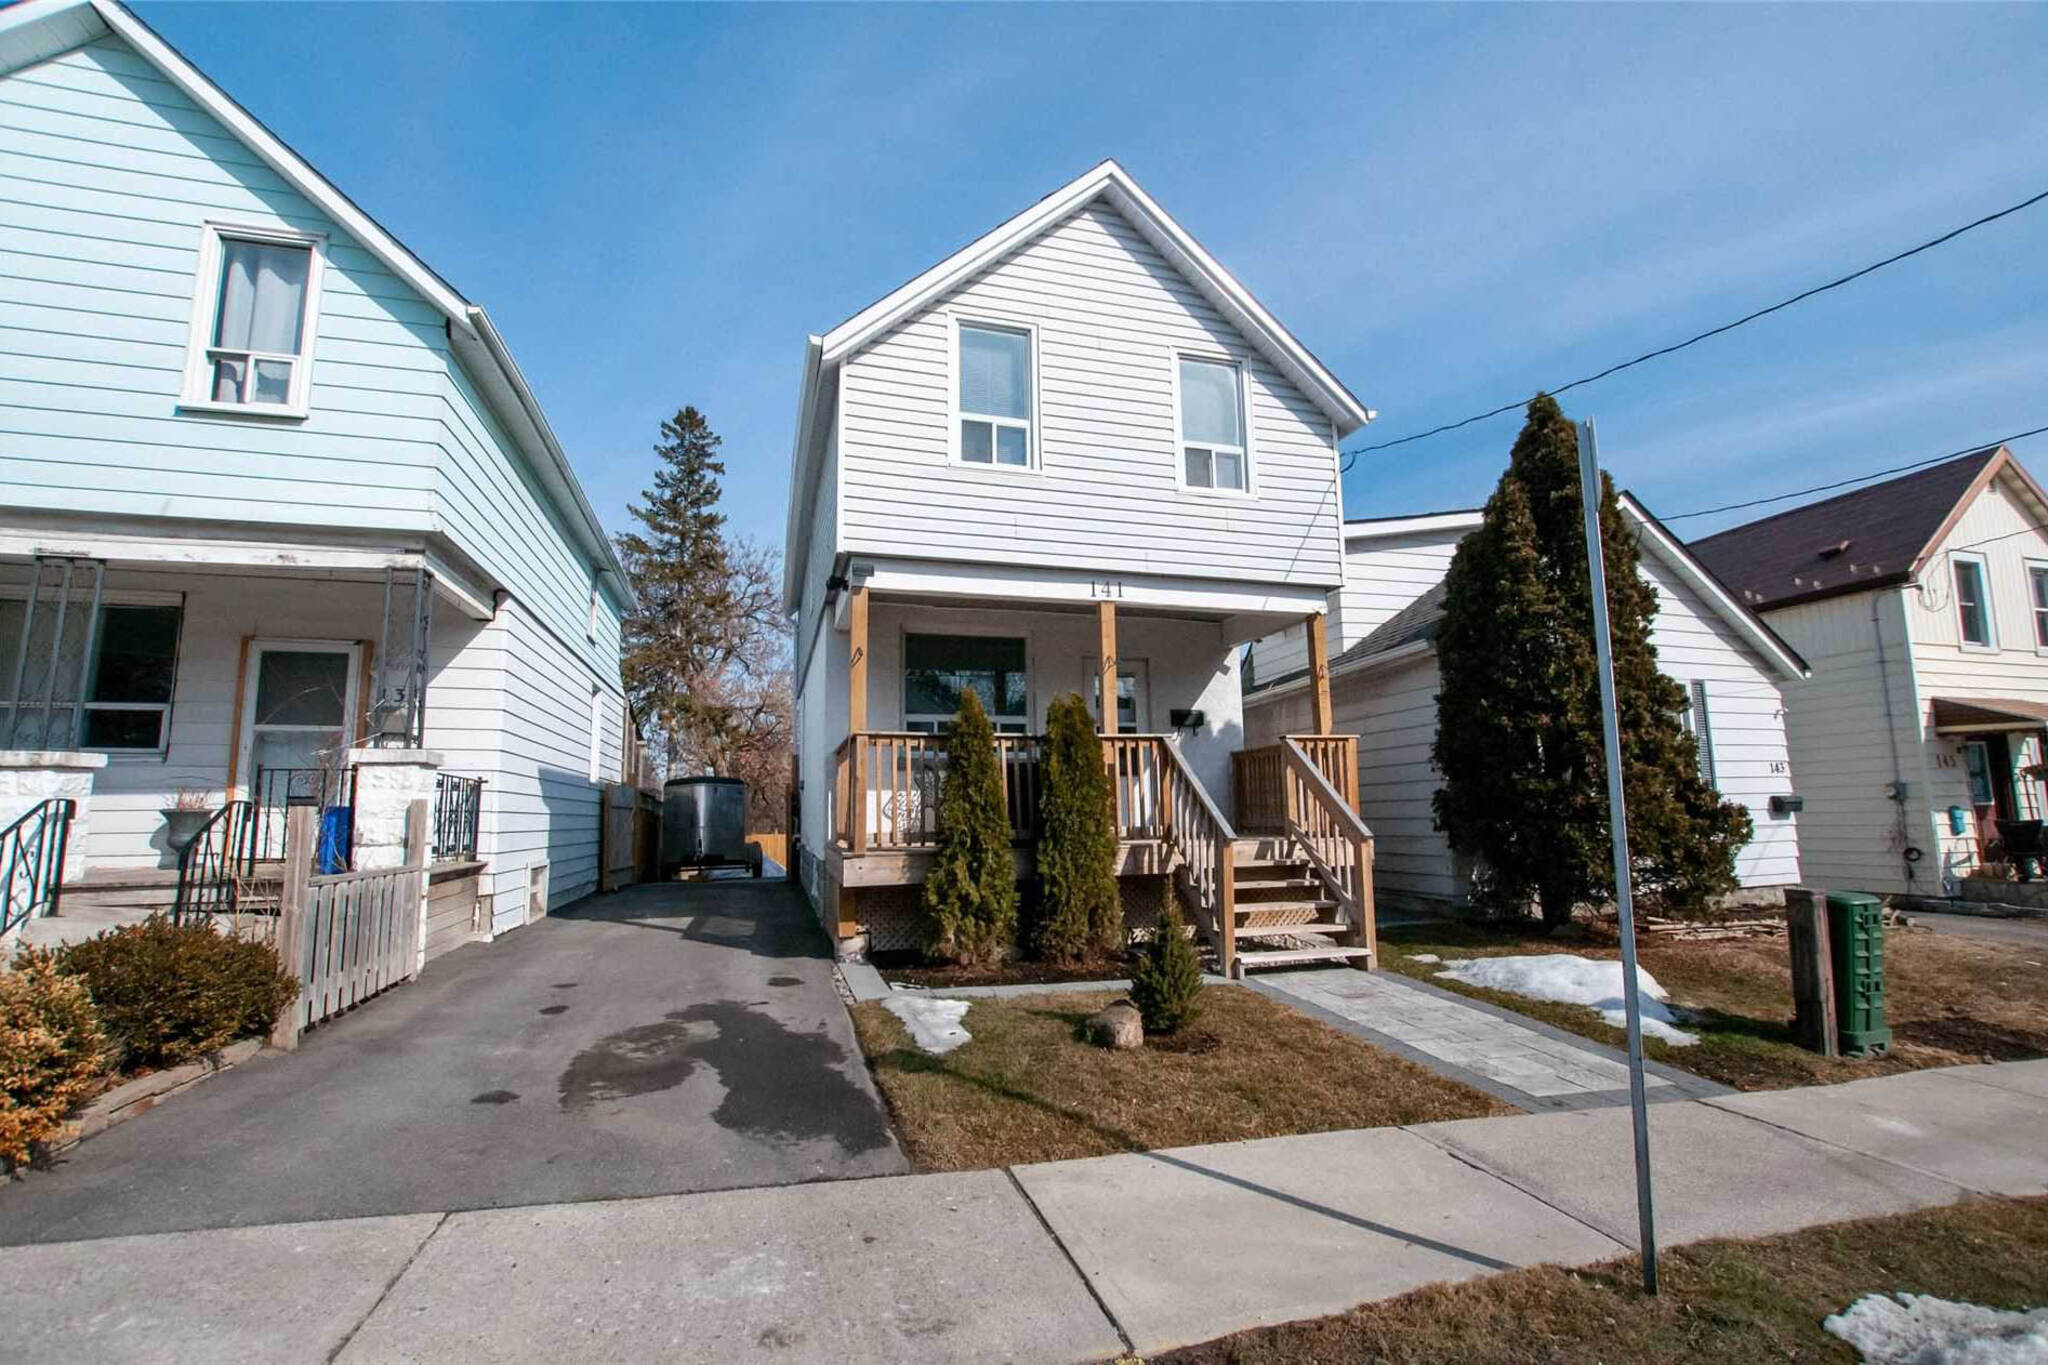 This detached house in Oshawa costs the same as a one-bed condo in Toronto